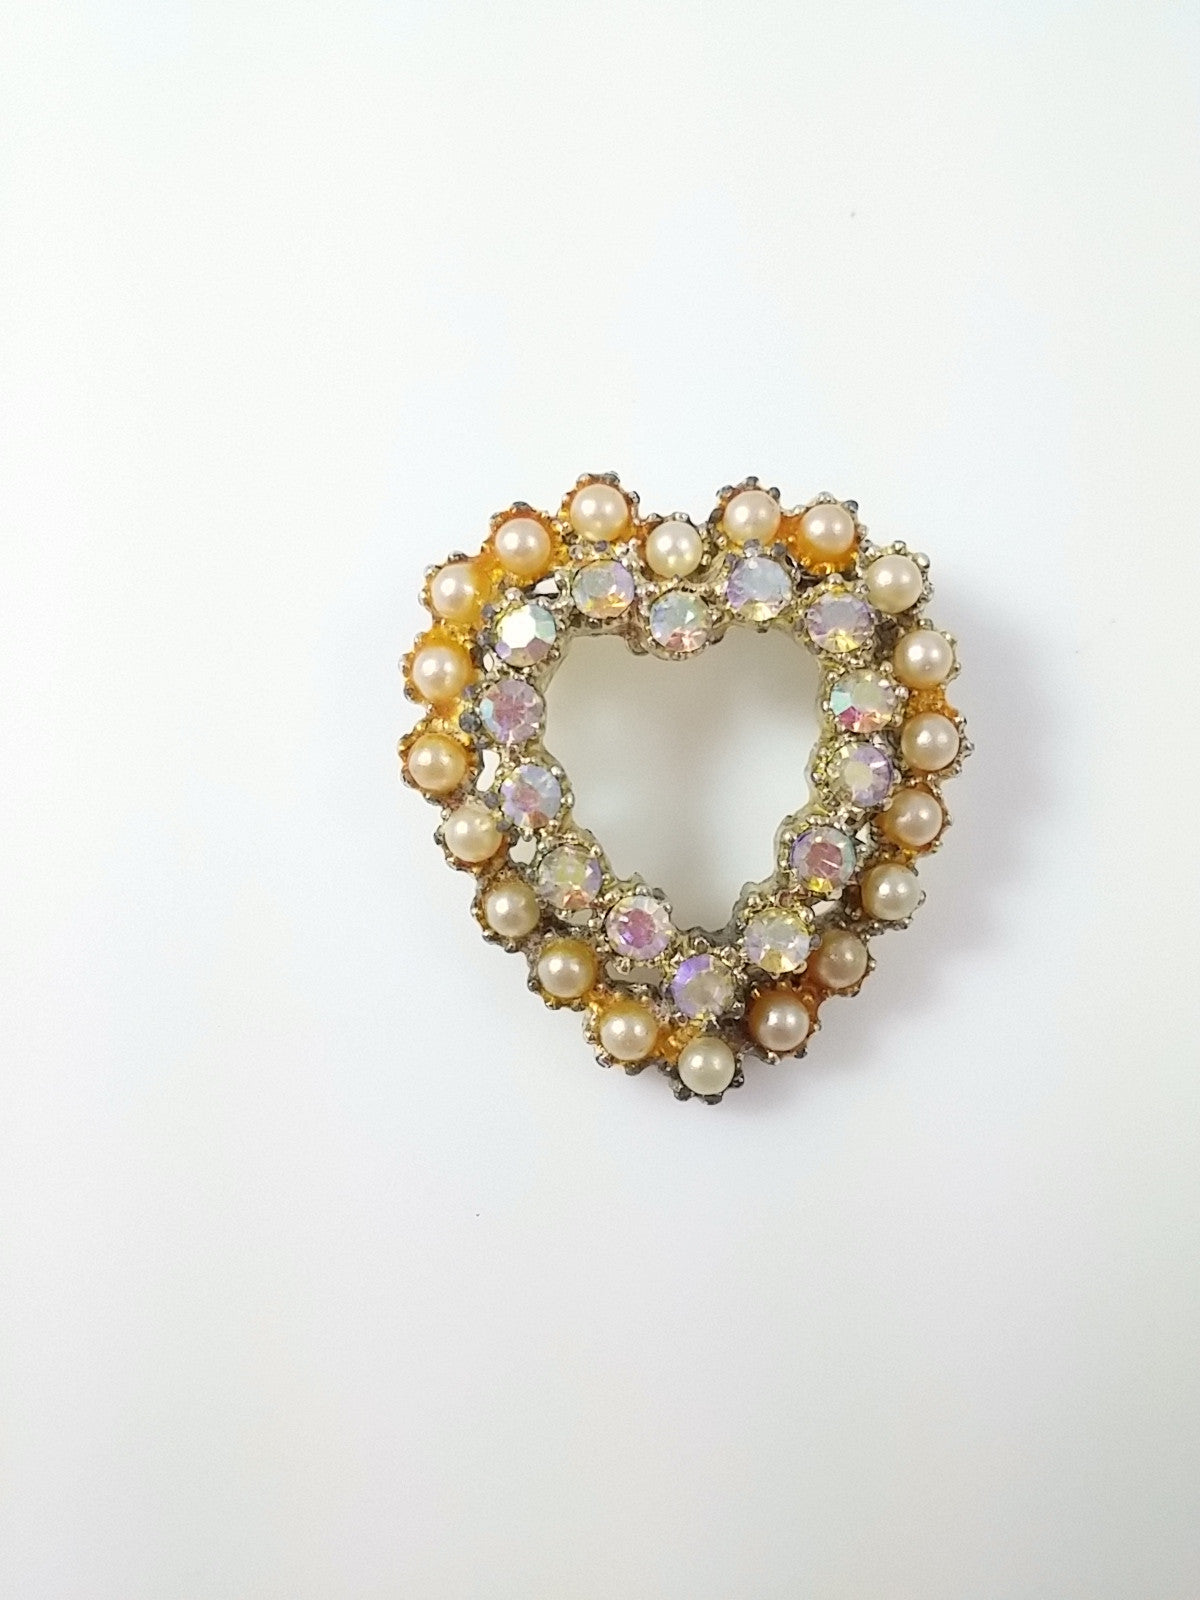 Vintage Brooch Heart Shape Faux Pearl and Aurora Borealis - Dirty 30 Vintage